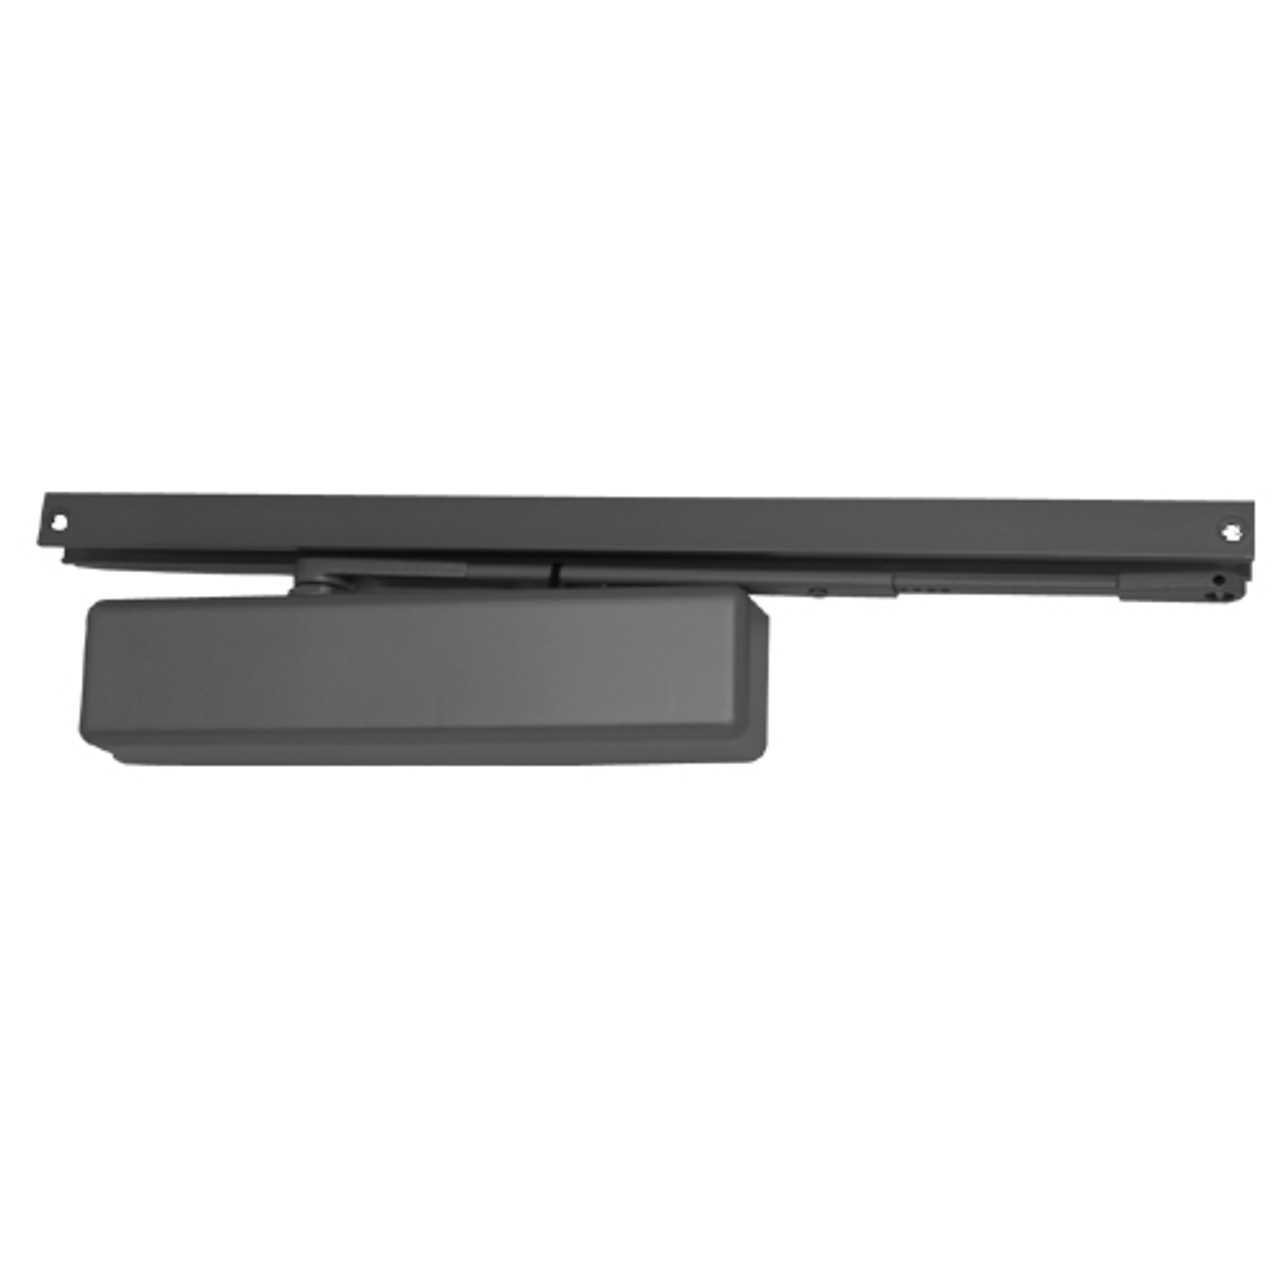 1461T-H-BUMPER-BLACK LCN Surface Mount Door Closer with Hold Open Track with Bumper in Black Finish